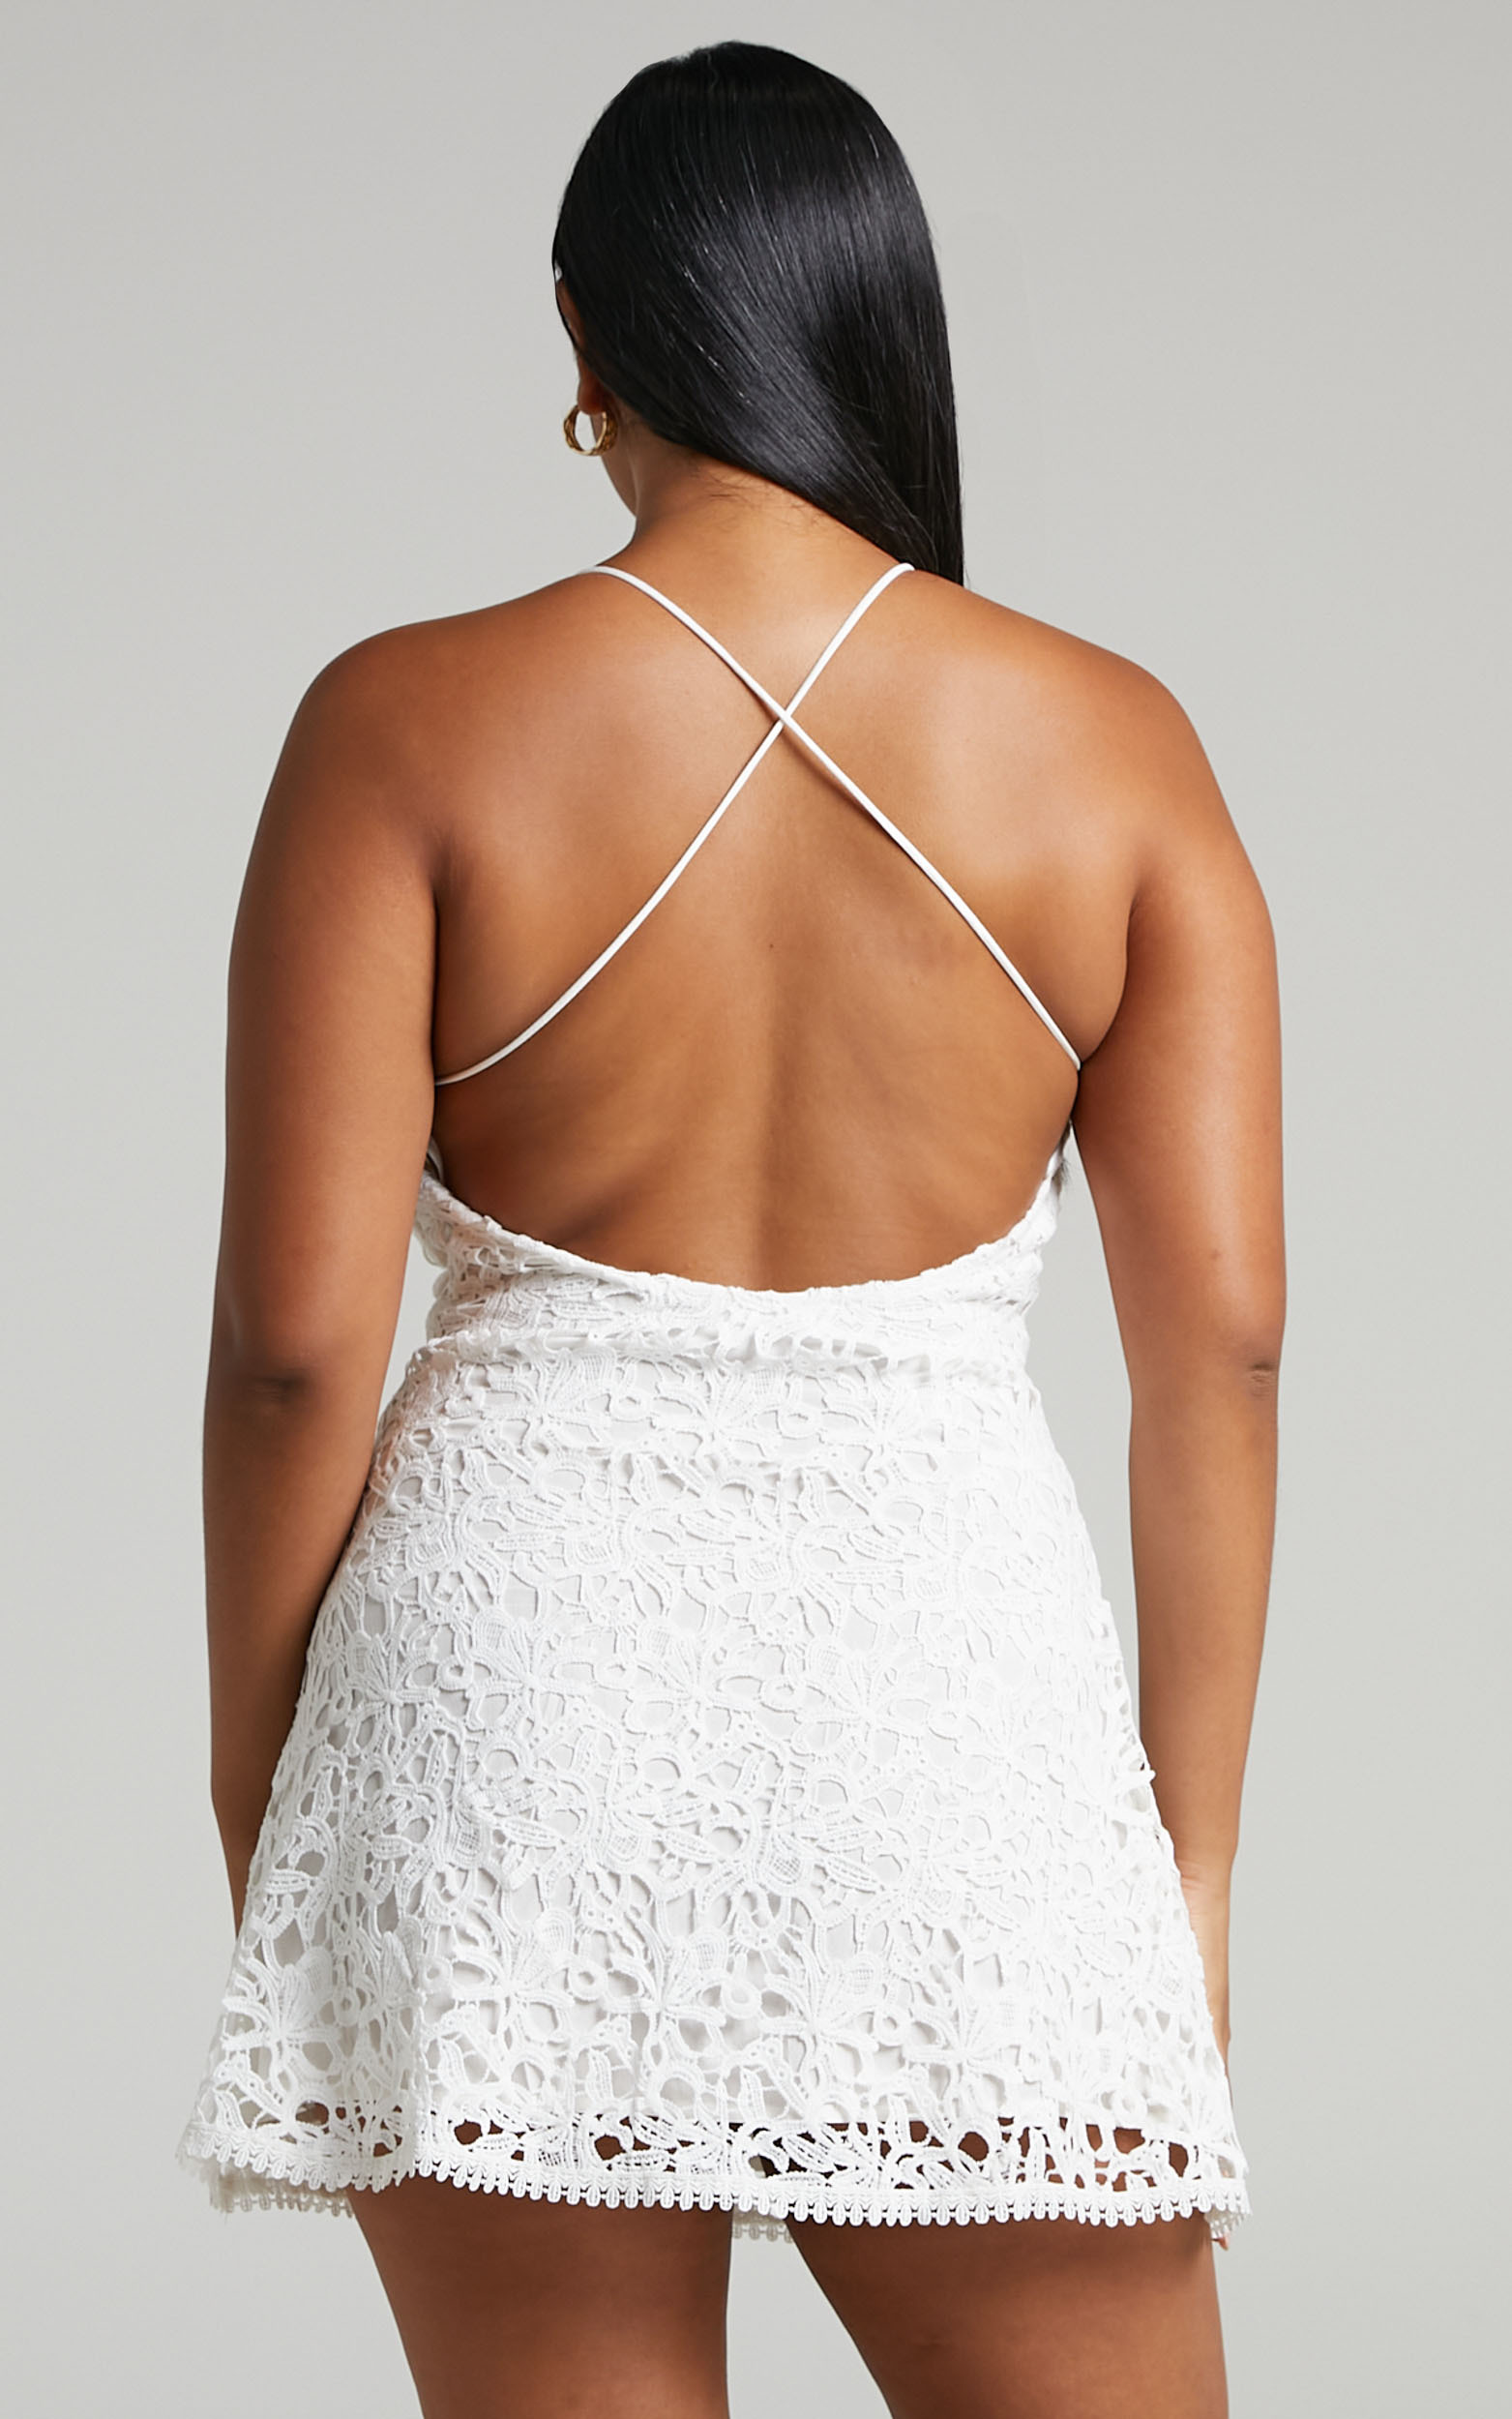 Megumi Cross Back High Neck Mini Dress in Broderie Lace in White - 04, WHT1, hi-res image number null